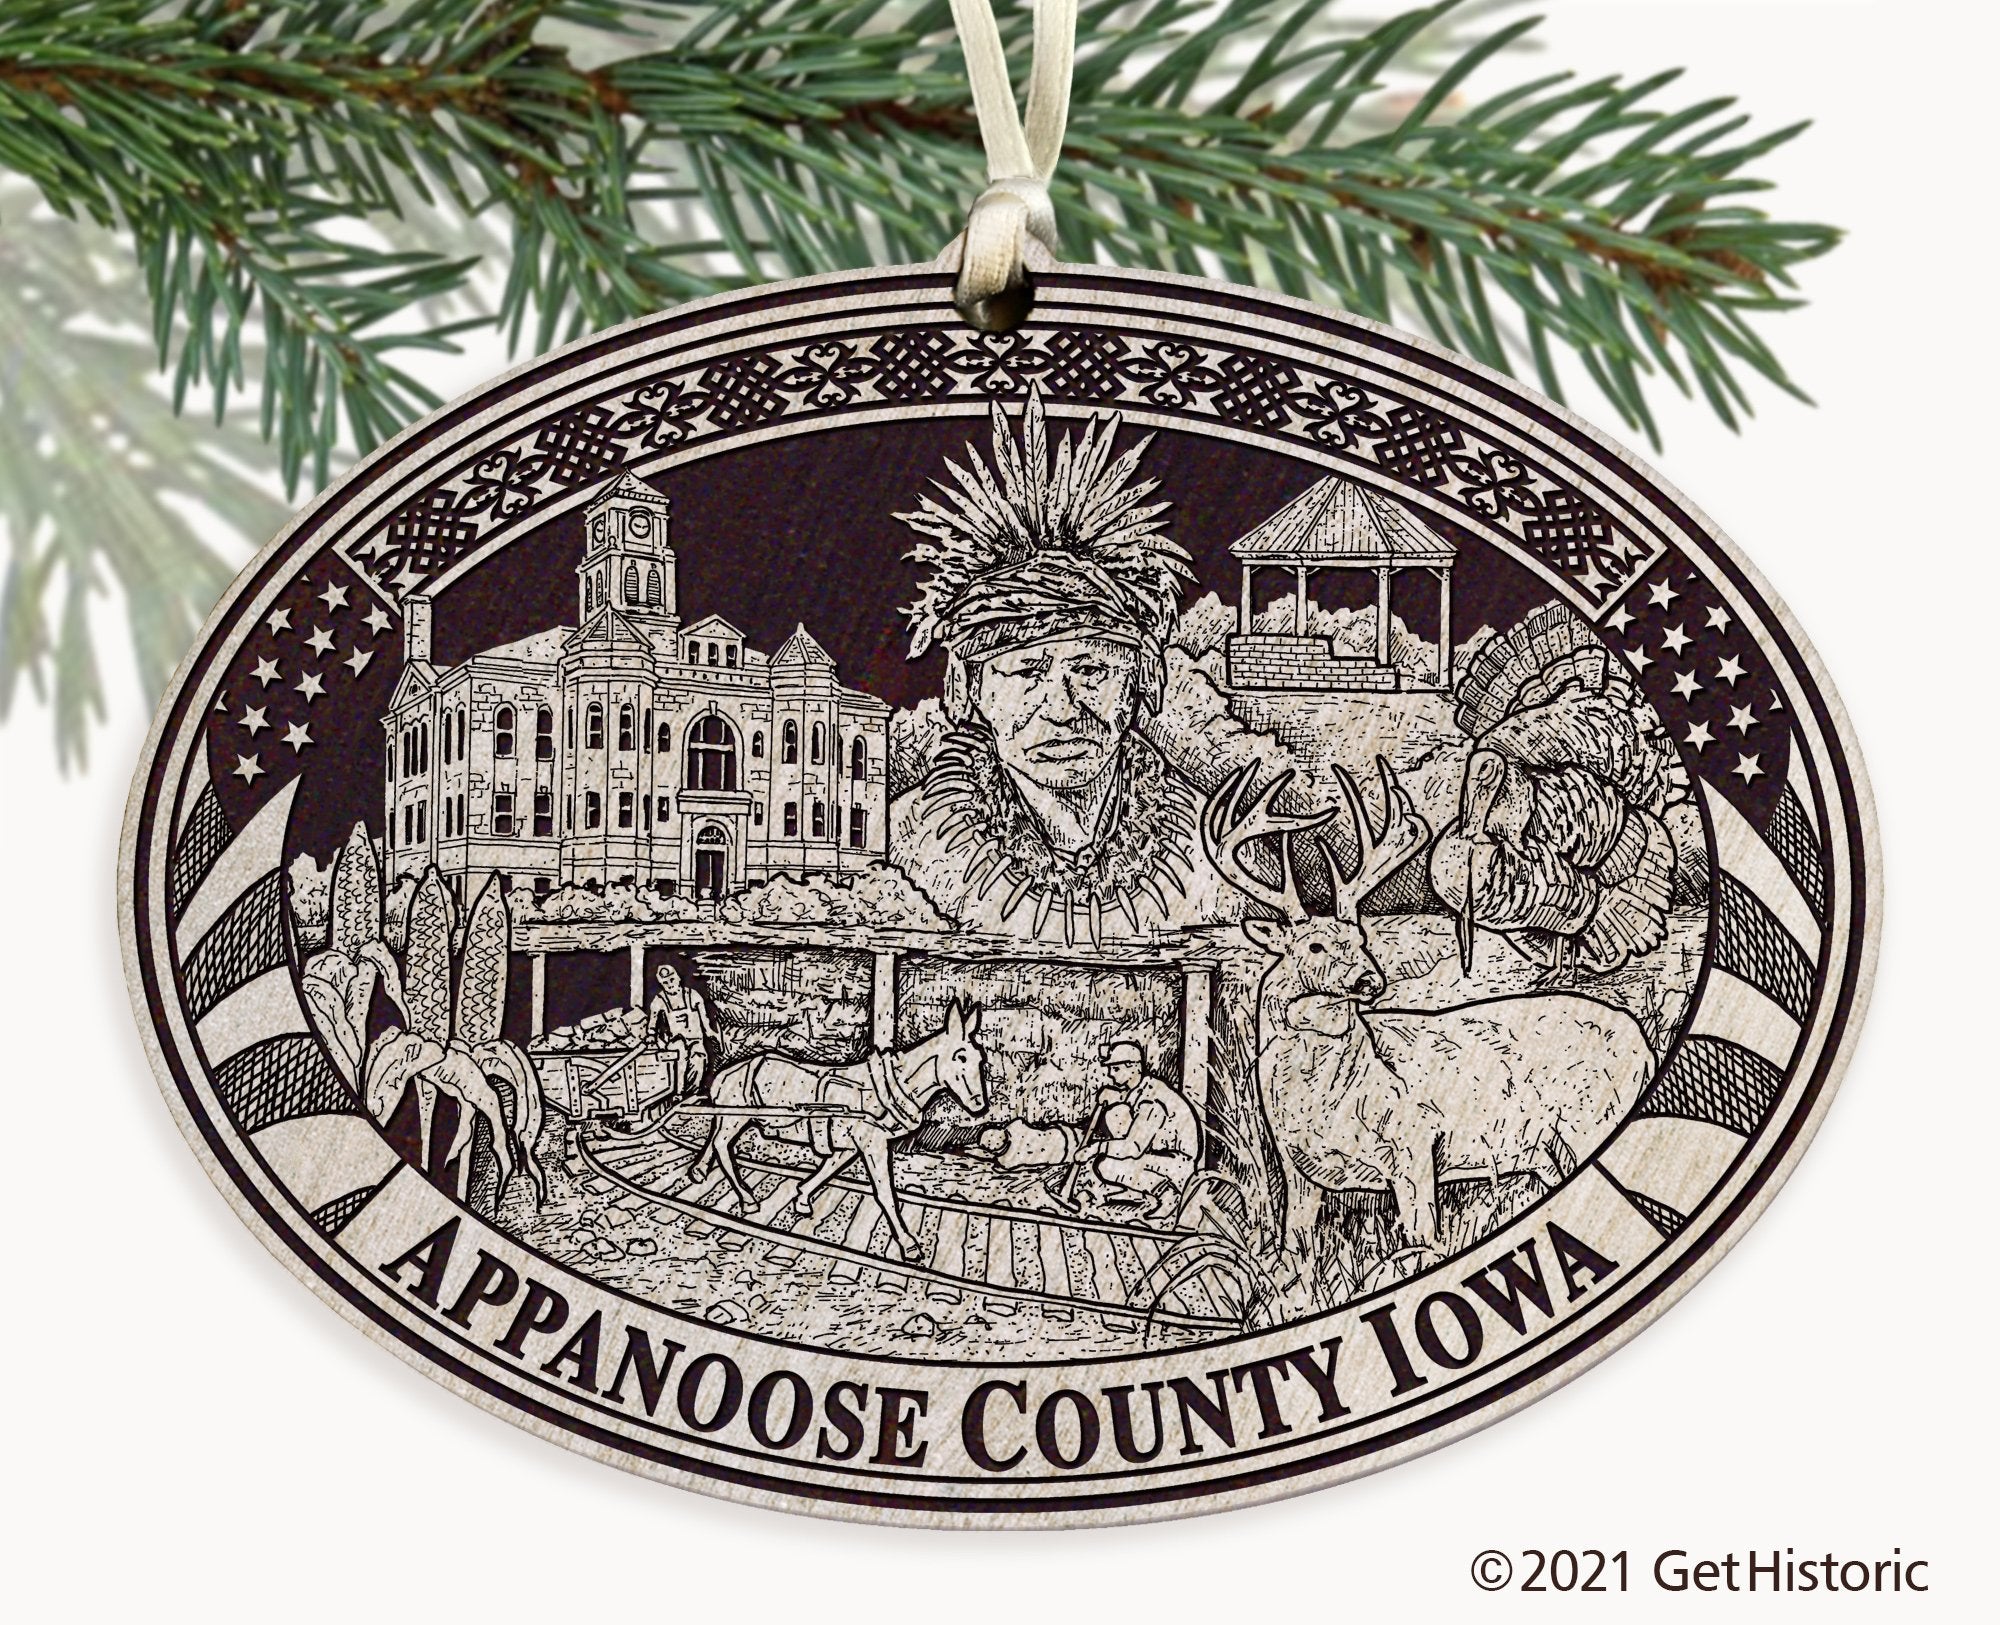 Appanoose County Iowa Engraved Ornament